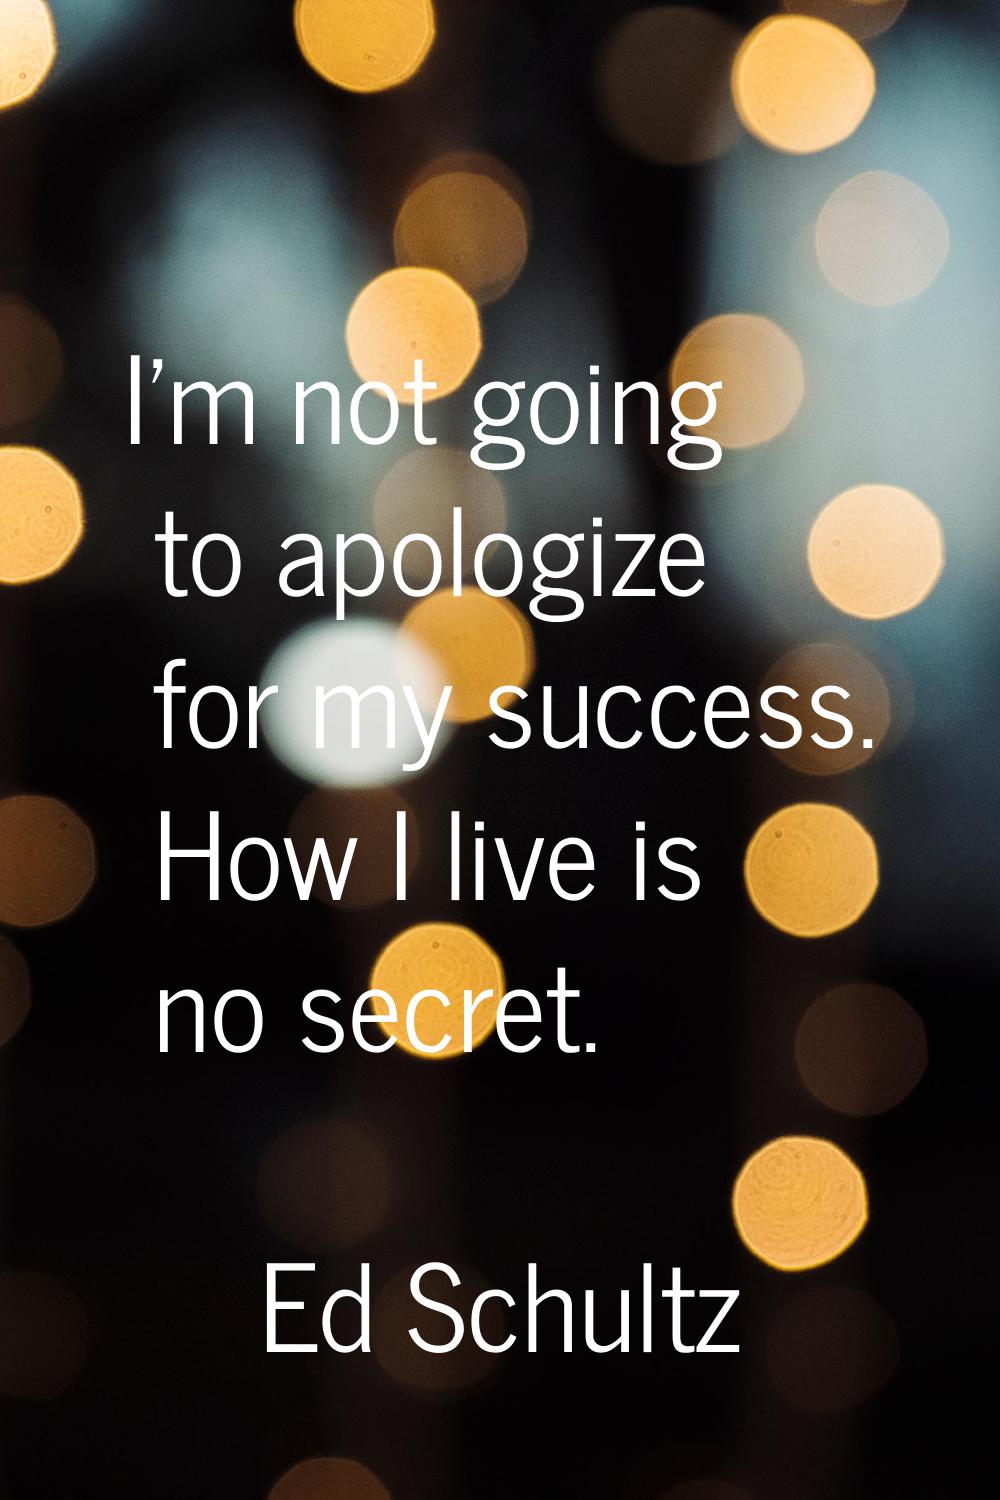 I'm not going to apologize for my success. How I live is no secret.